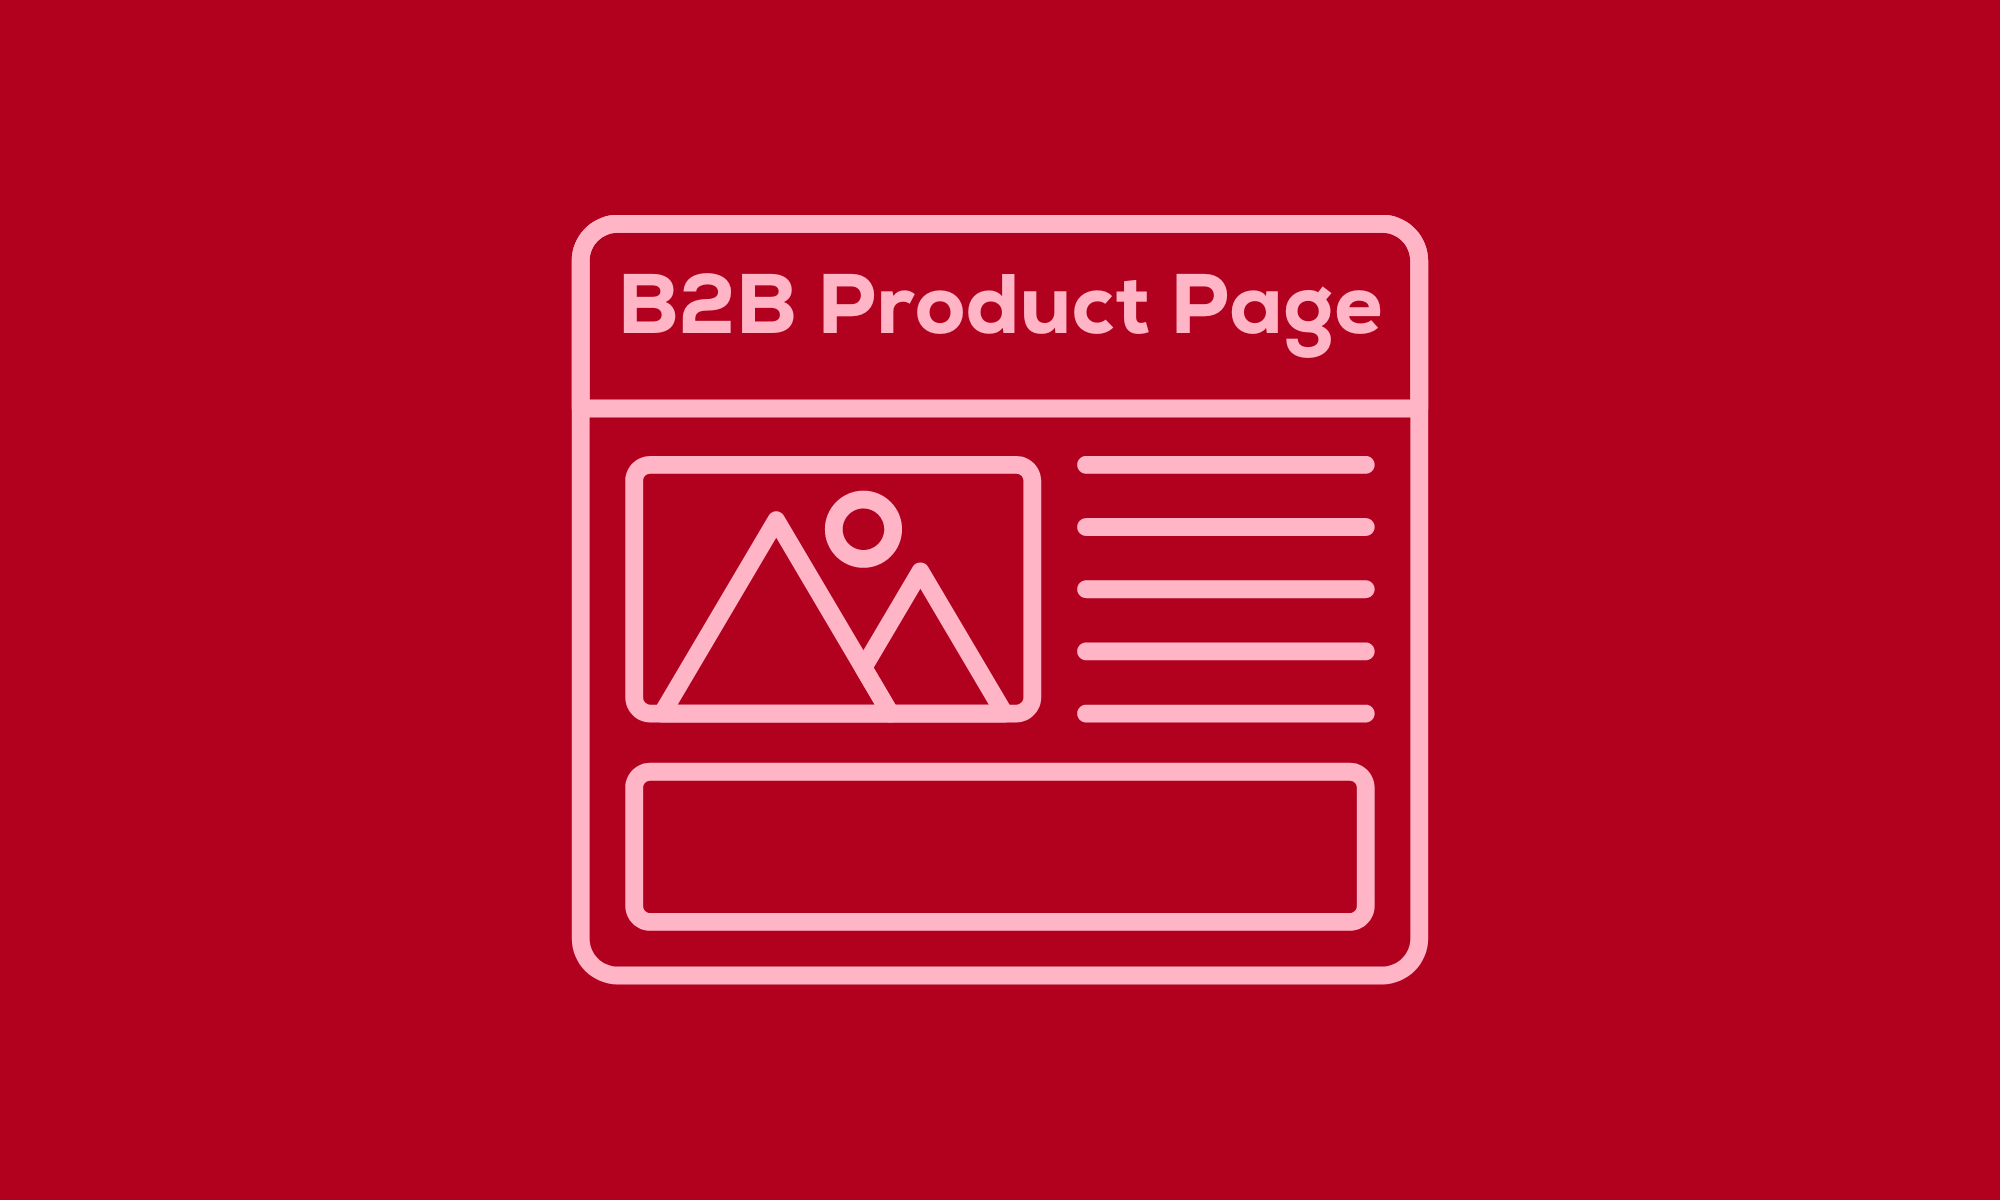 B2B product pages